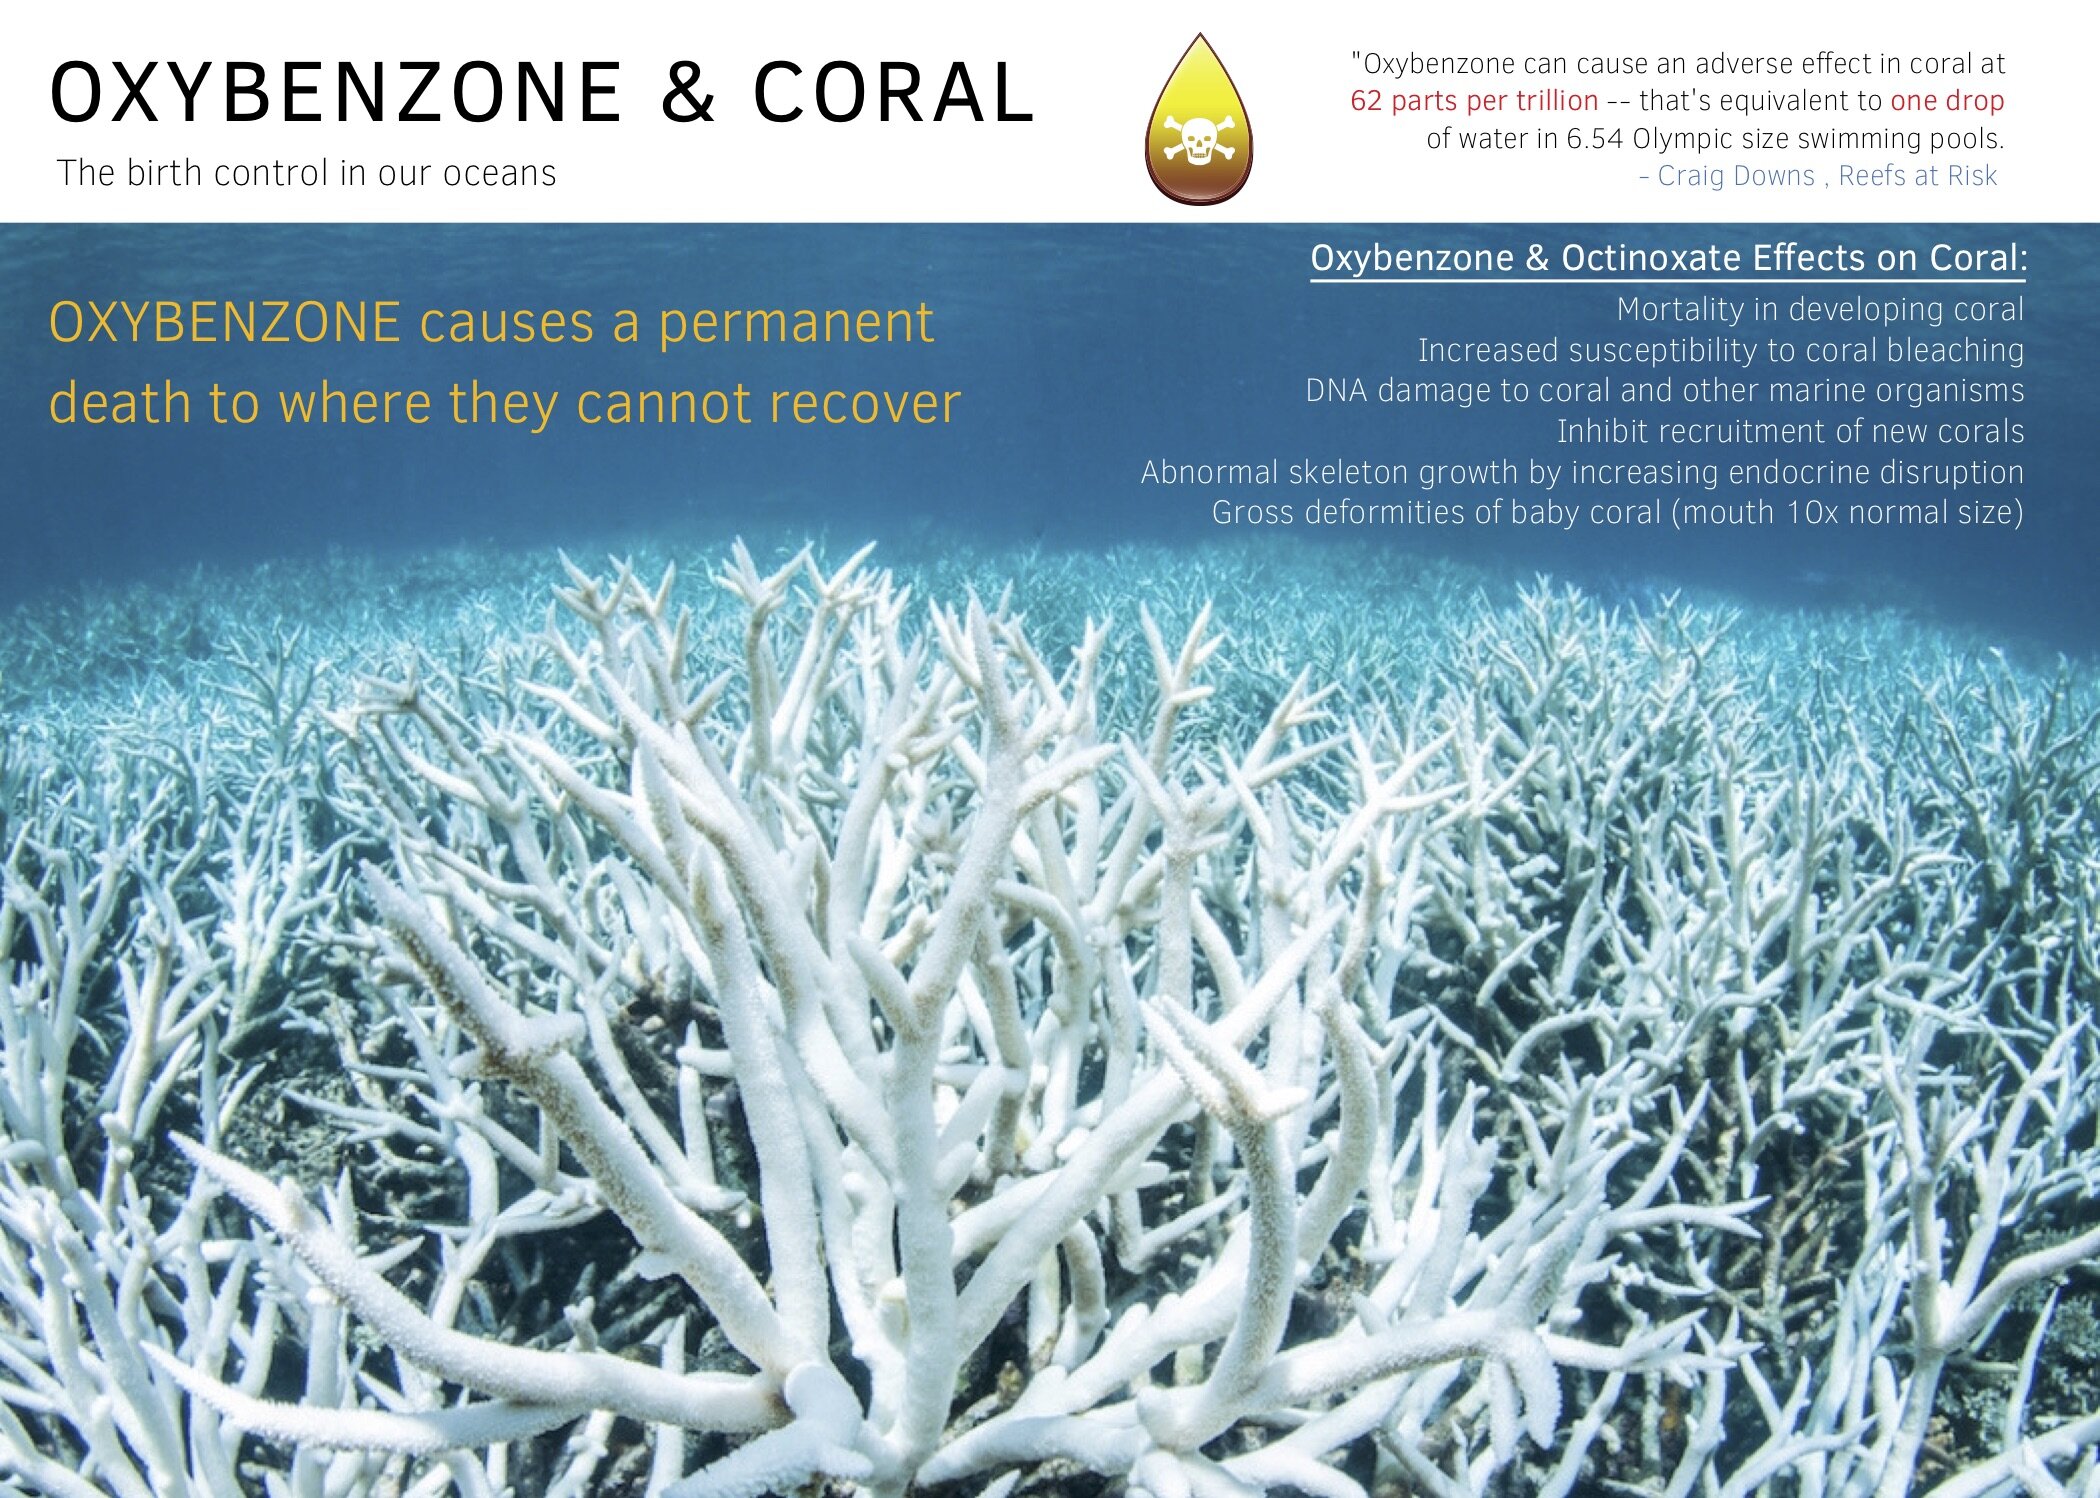 SAVE THE CORALS